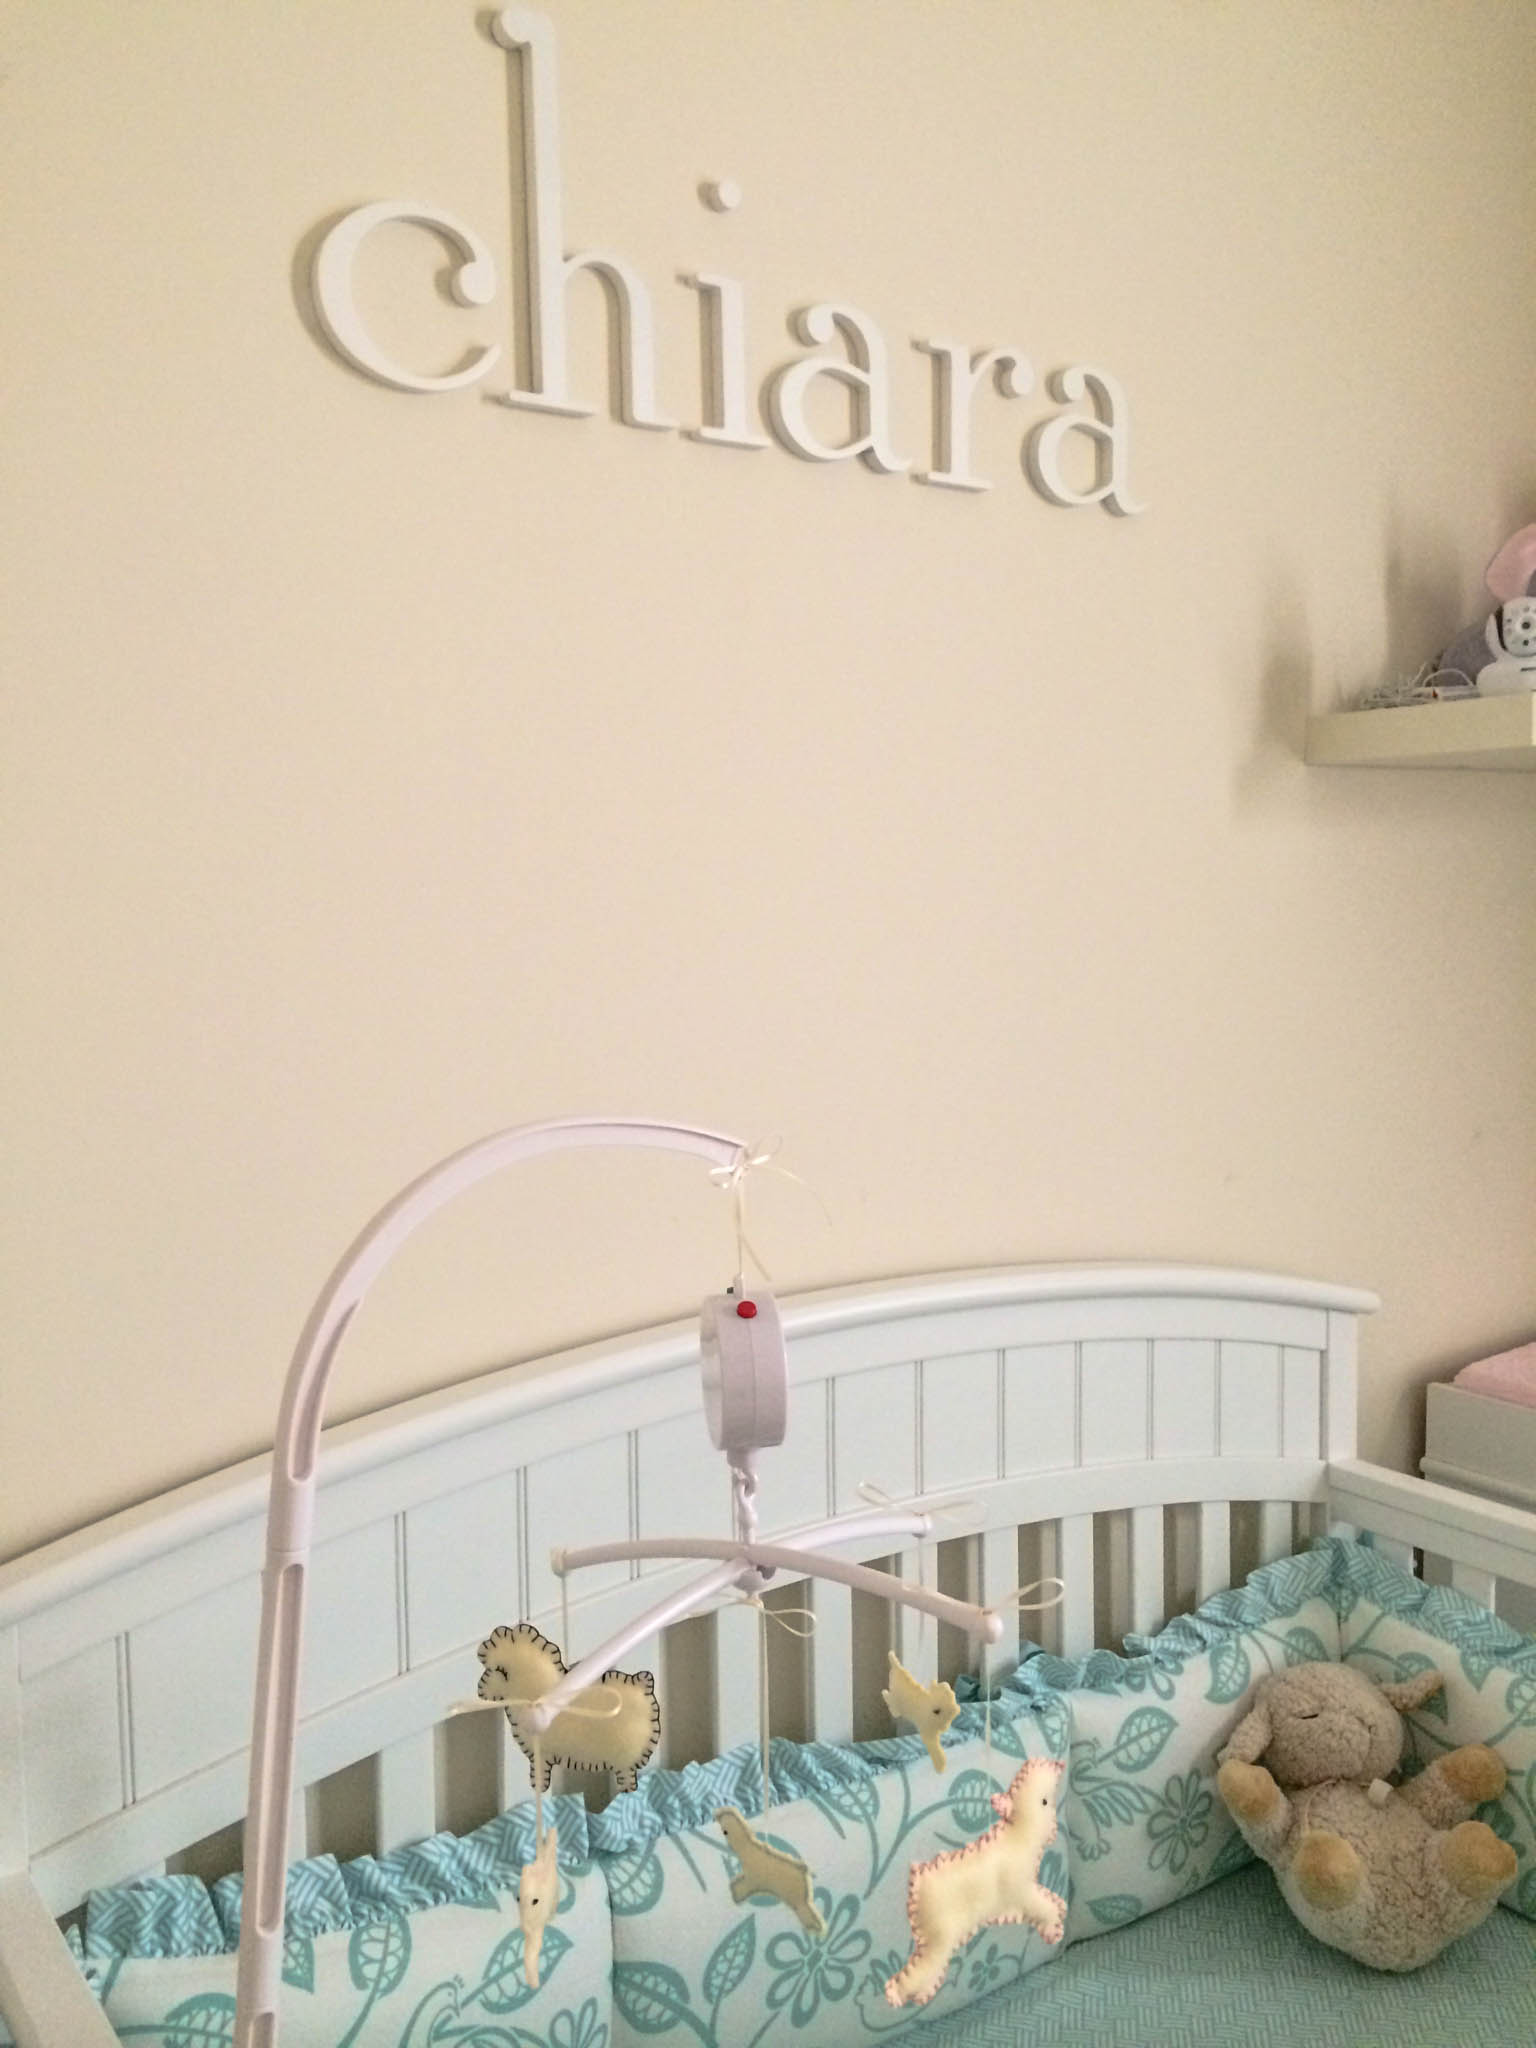 Personalized Name Wall Decor and DIY Lamb Mobile